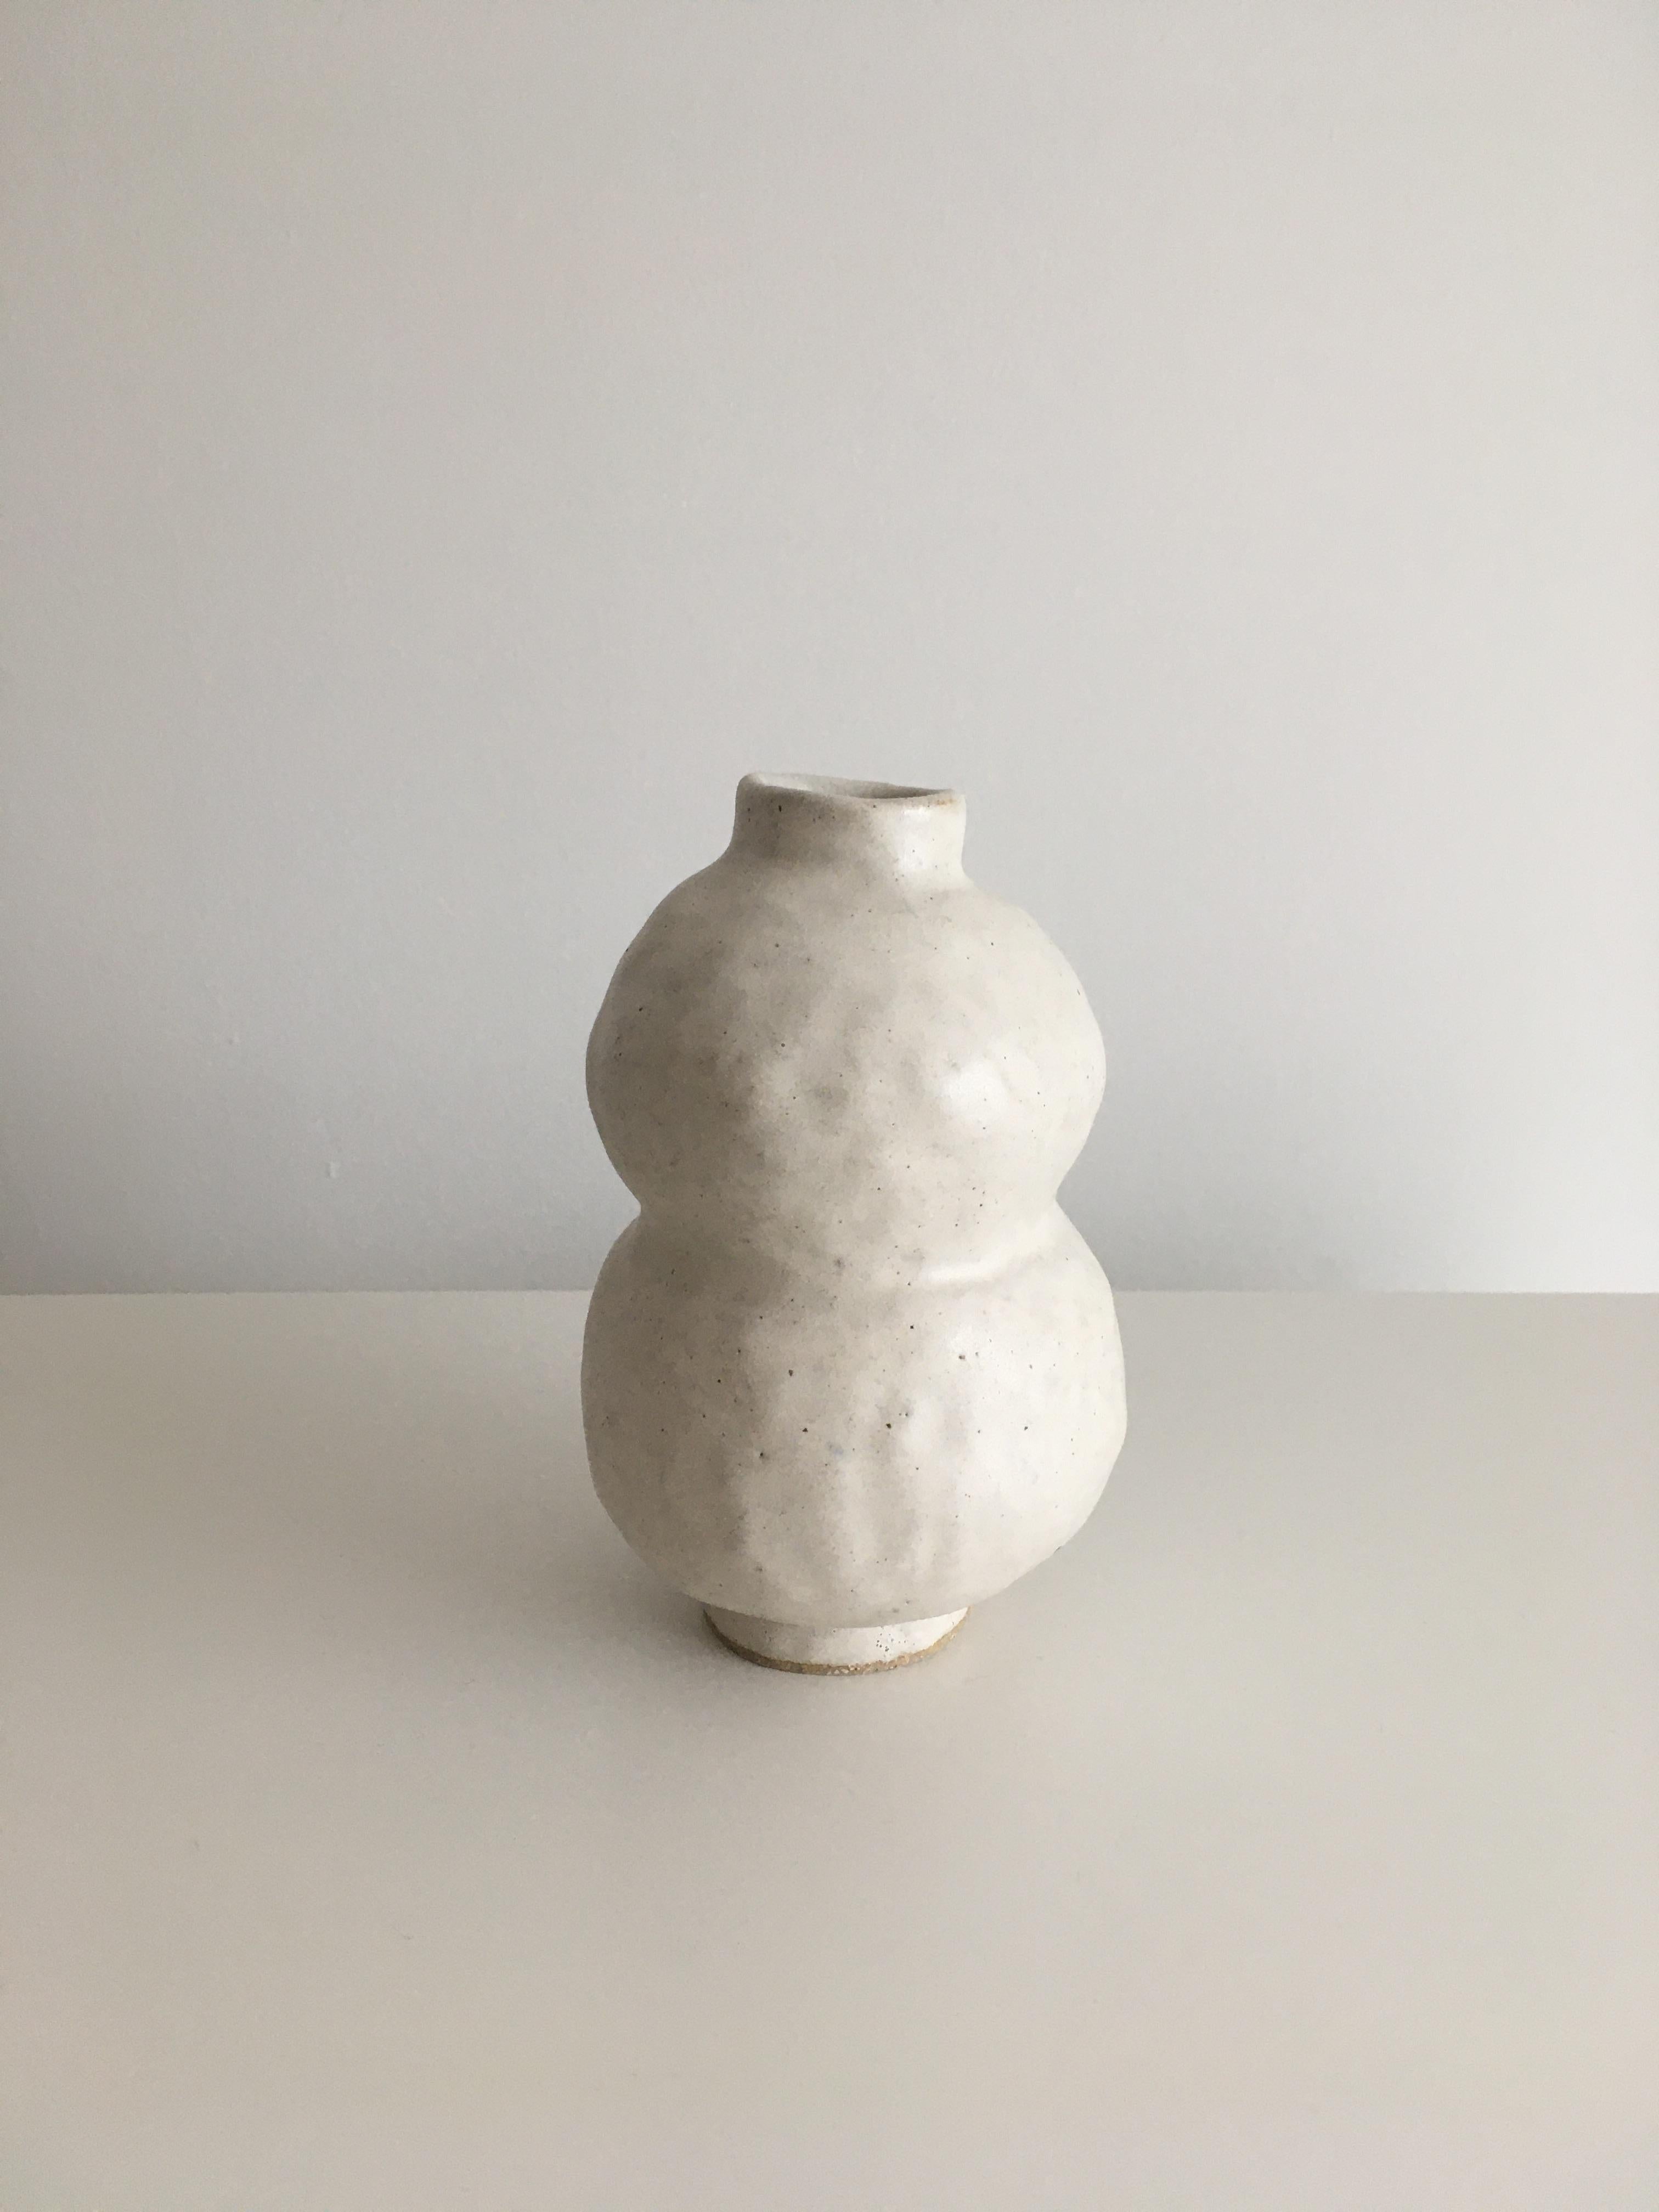 No.89 stoneware sculpture, Tonfisk by Ciona Lee 
One of a Kind
Dimensions: Ø 9 x H 14 cm
Materials: Grogged stoneware, satin cream glaze
Variations of size and colour available

Tonfisk is the ceramic practice by Ciona Lee, a Korean-Italian